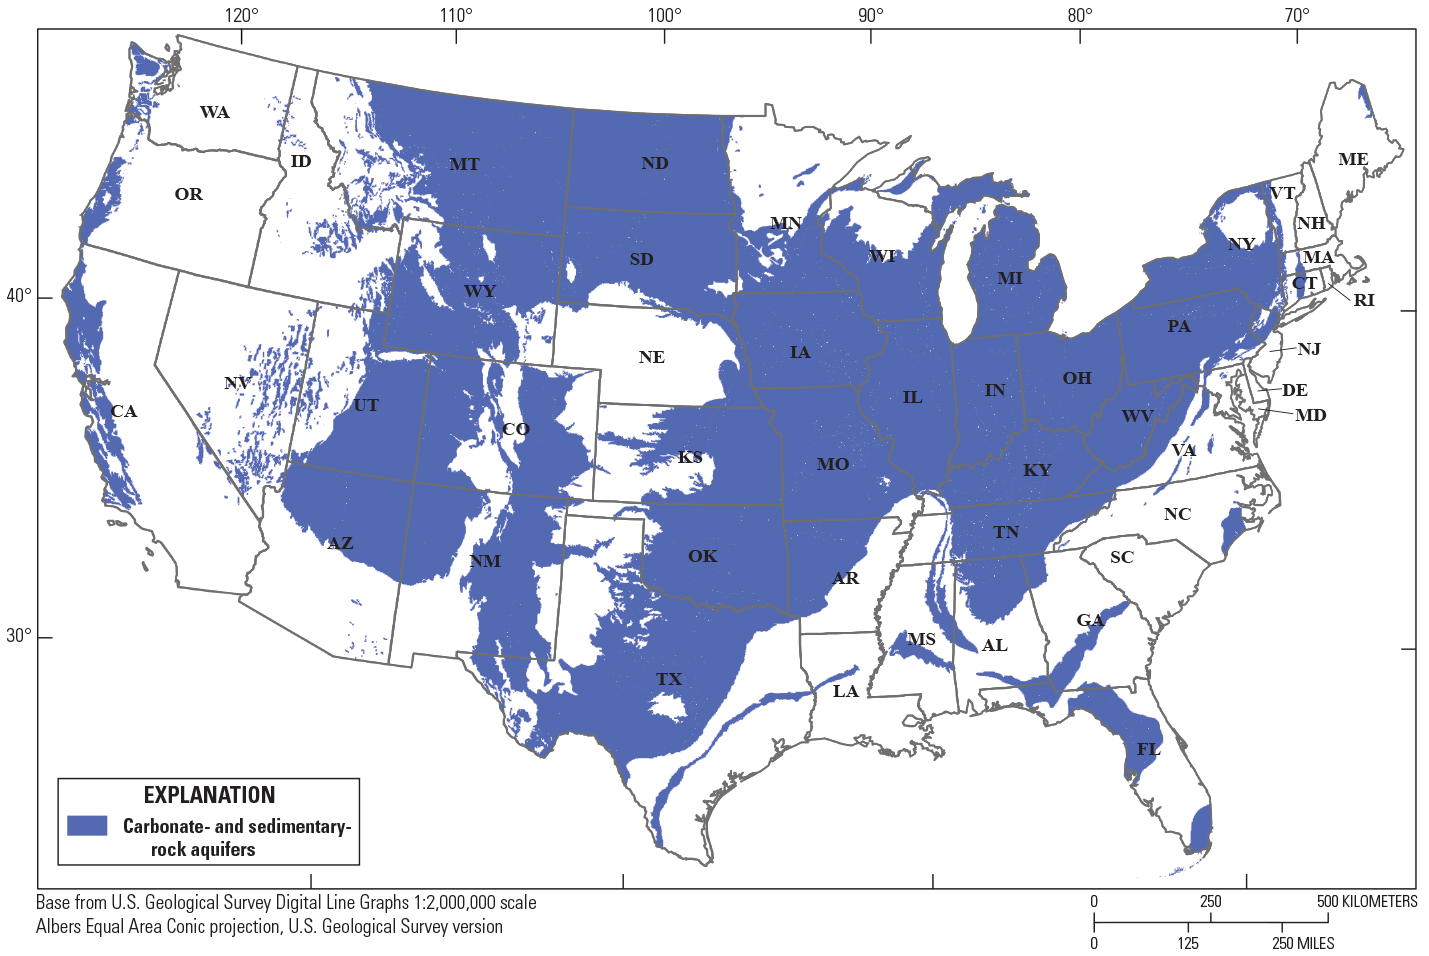 Carbonate- and sedimentary-rock aquifers are found primarily in the upper Midwest
                        and central parts of the United States